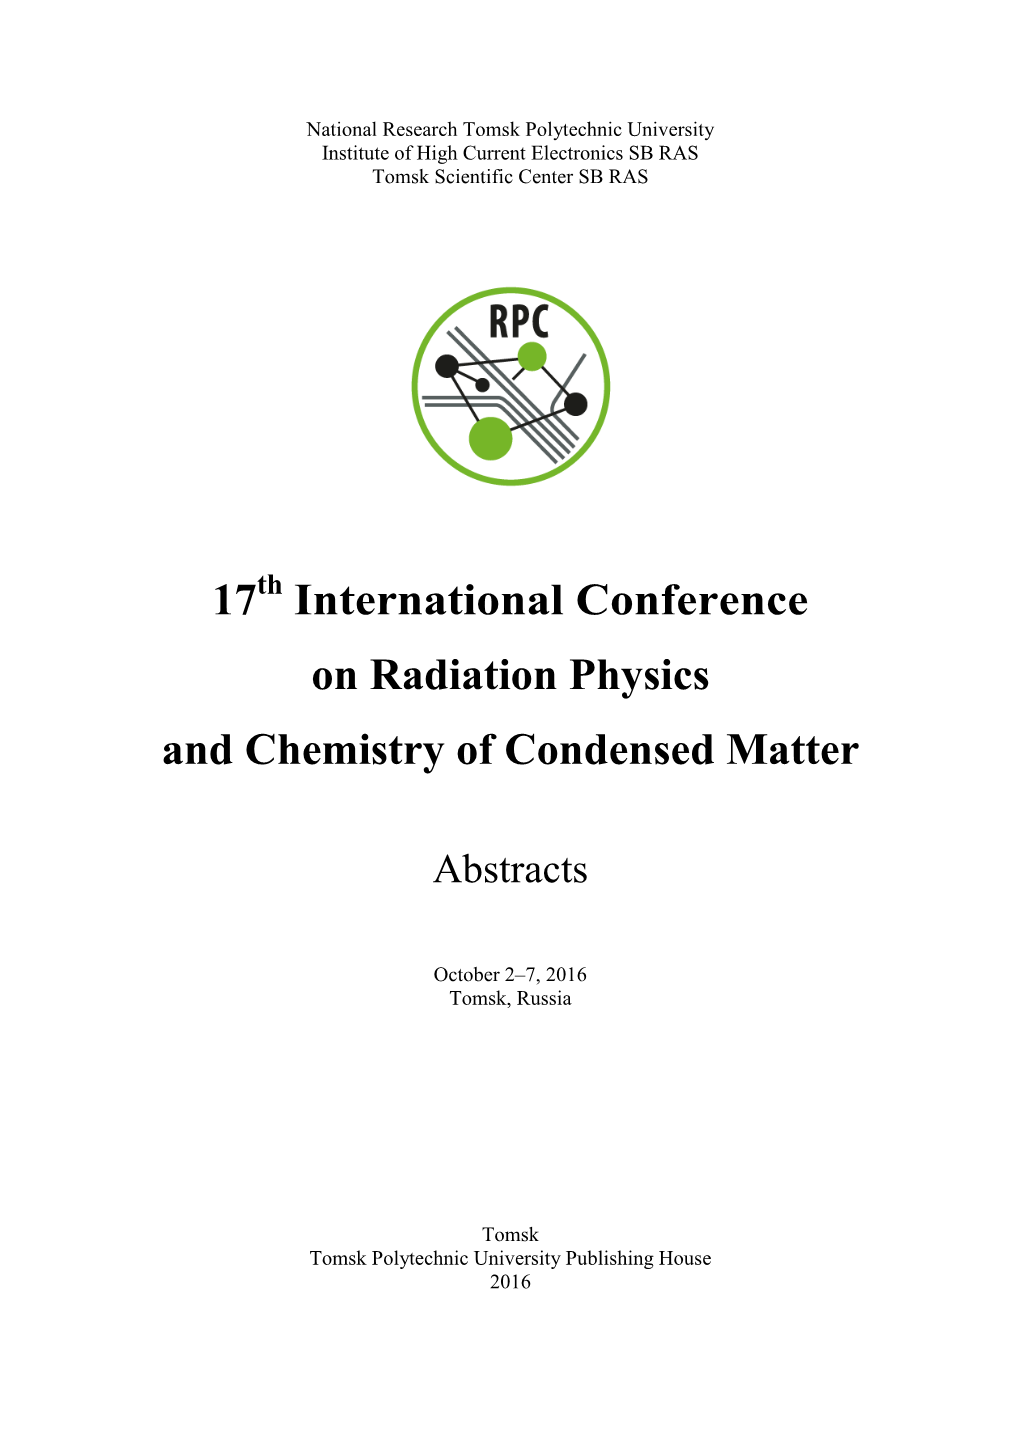 17 International Conference on Radiation Physics and Chemistry Of